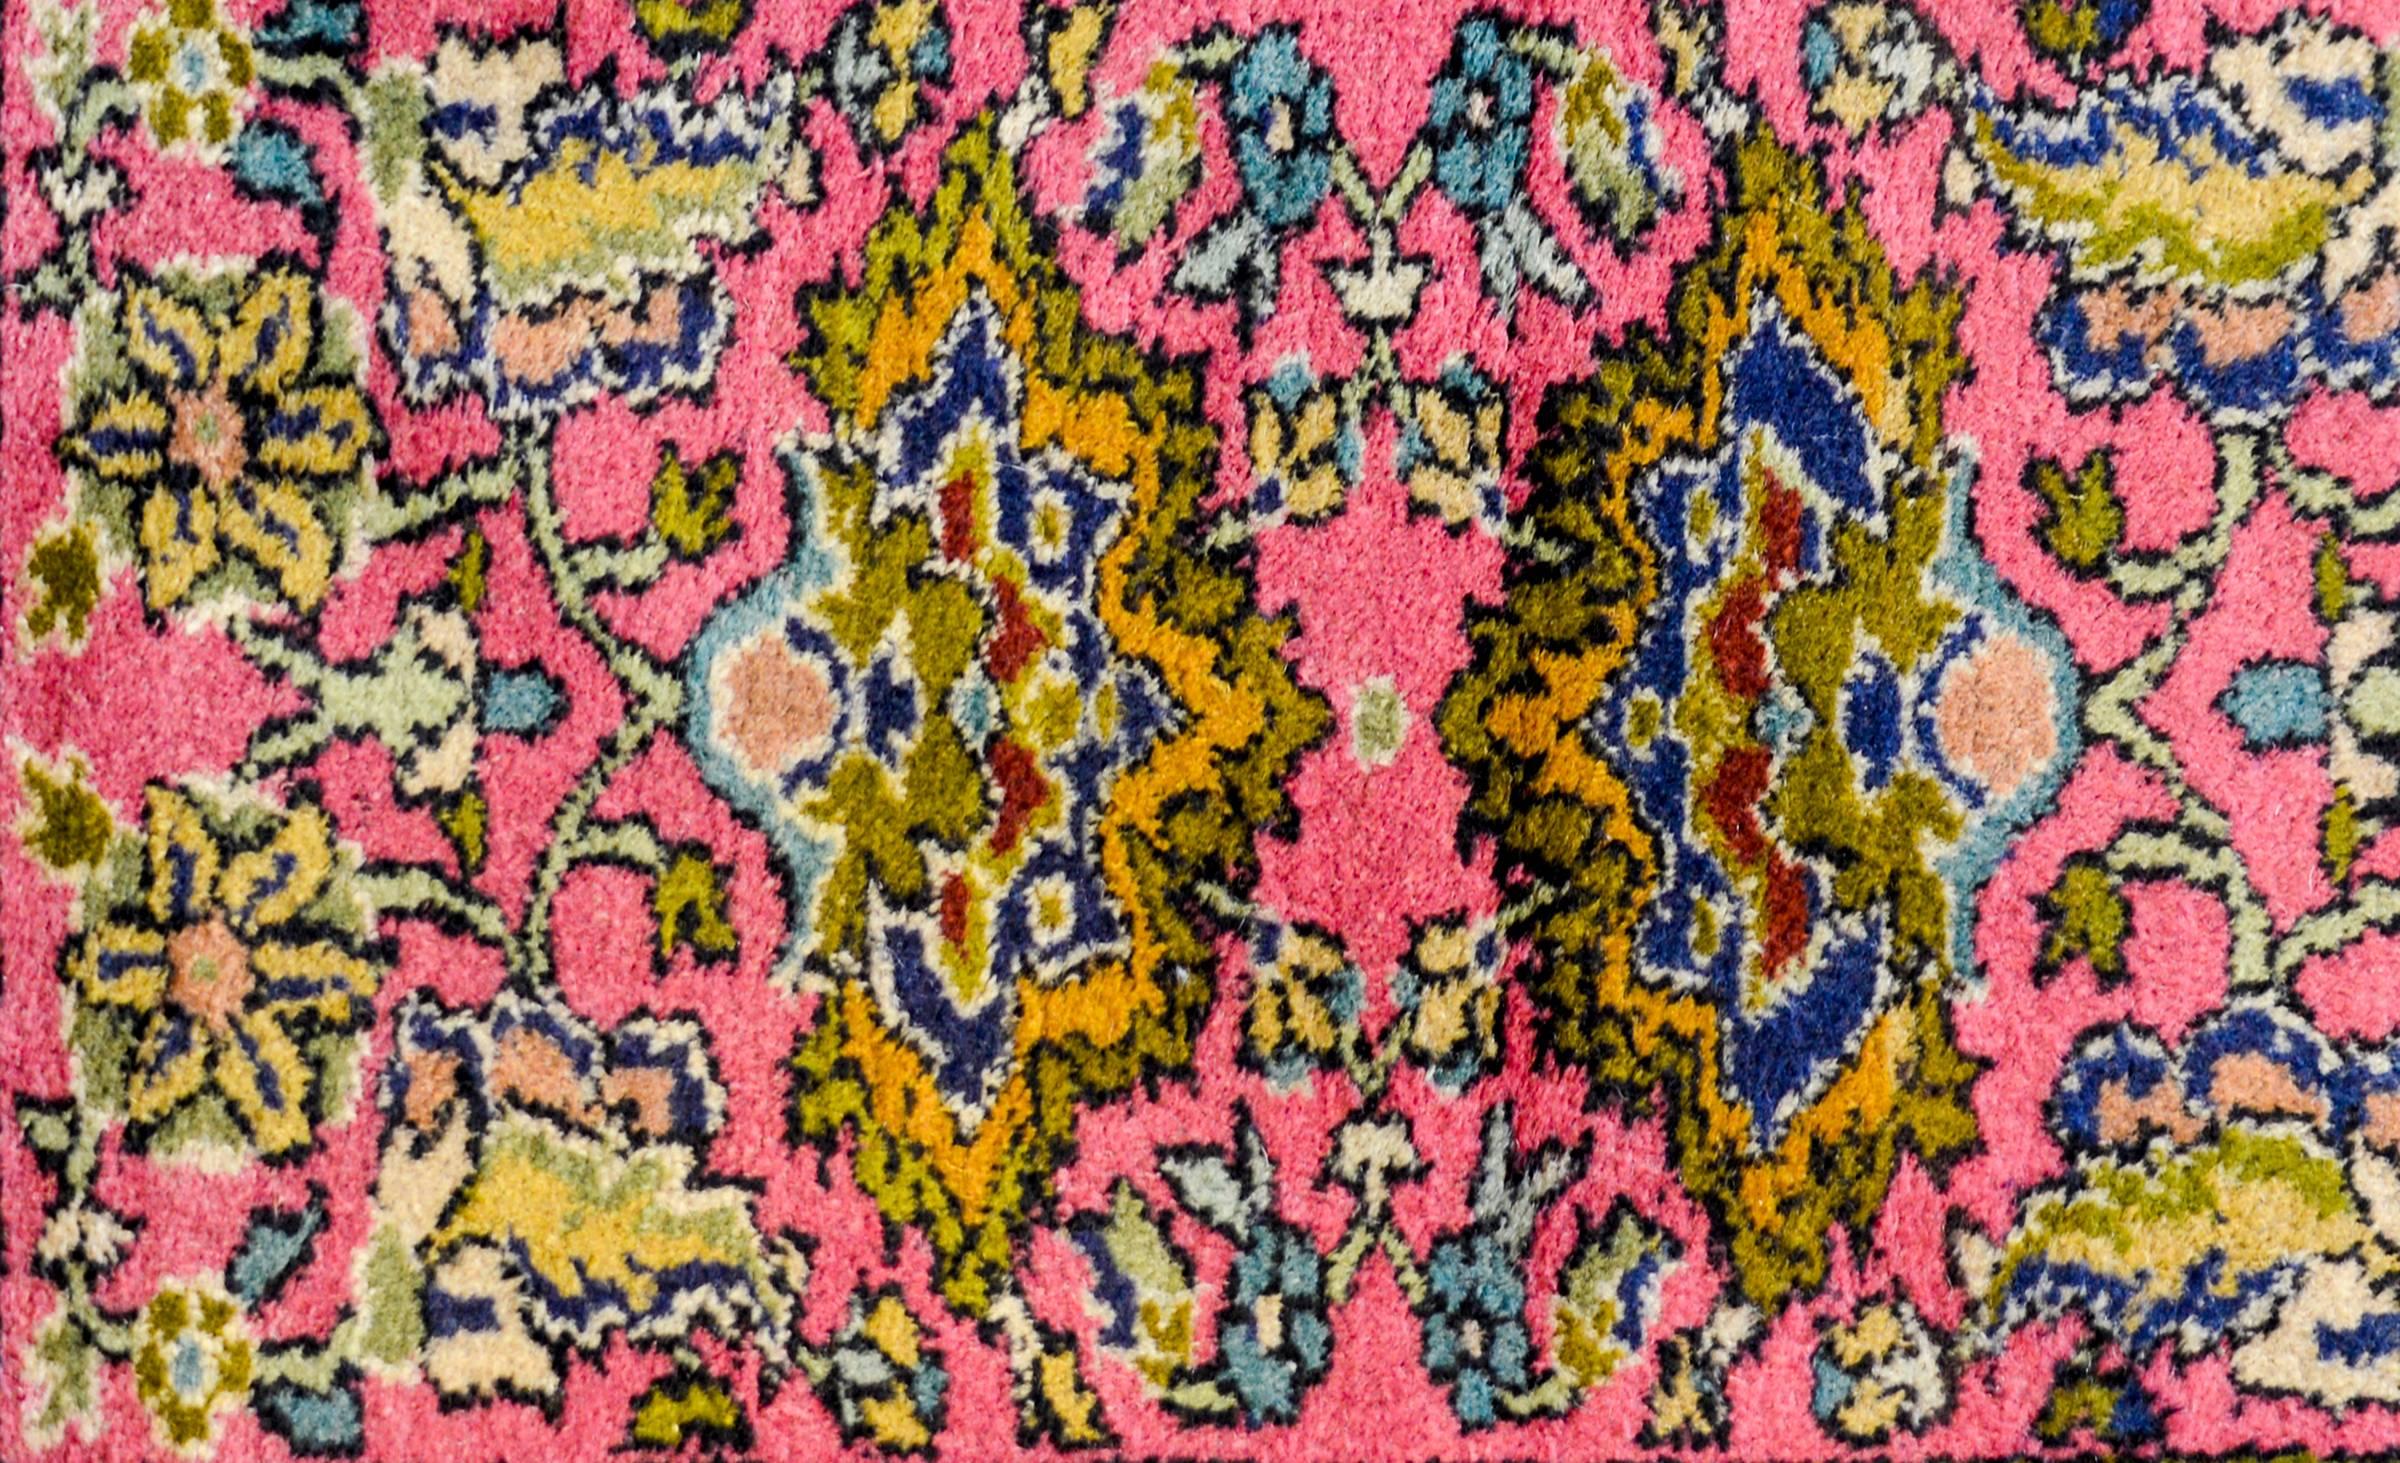 An early 20th century Indian Agra rug with a wonderful large-scale mirrored floral and vine pattern woven in light and dark green, gold, and indigo on a bright pink background, surrounded by a thin floral and leaf border.